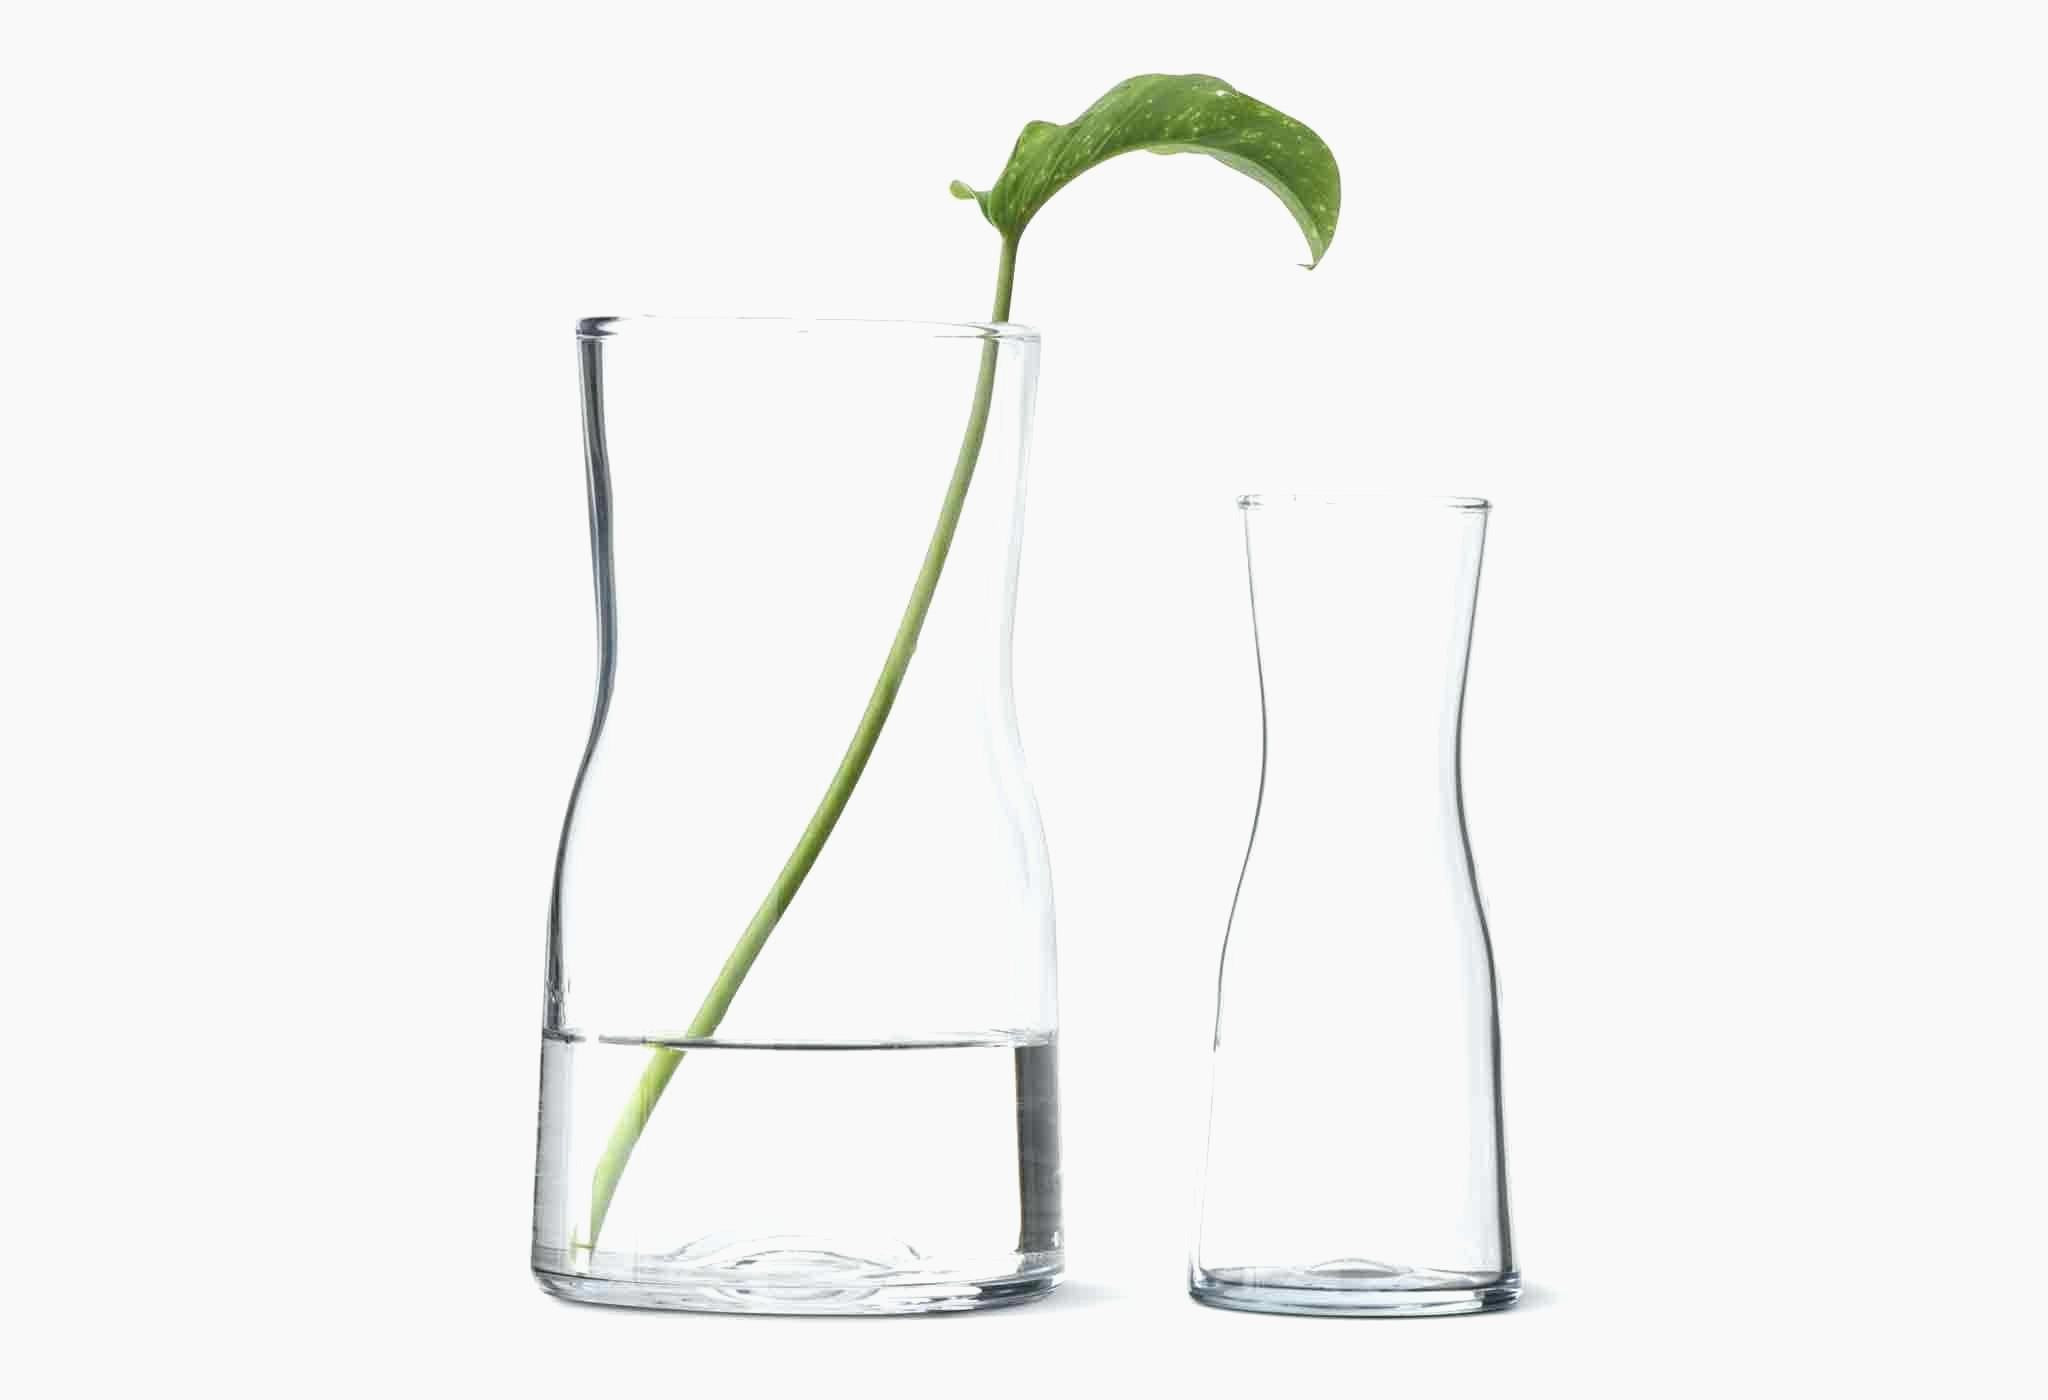 unique clear glass vases of 47 glass fireplace doors collection within new design ikea mantel wonderful cylinder vase clear glass pe s5h vases ikea the is